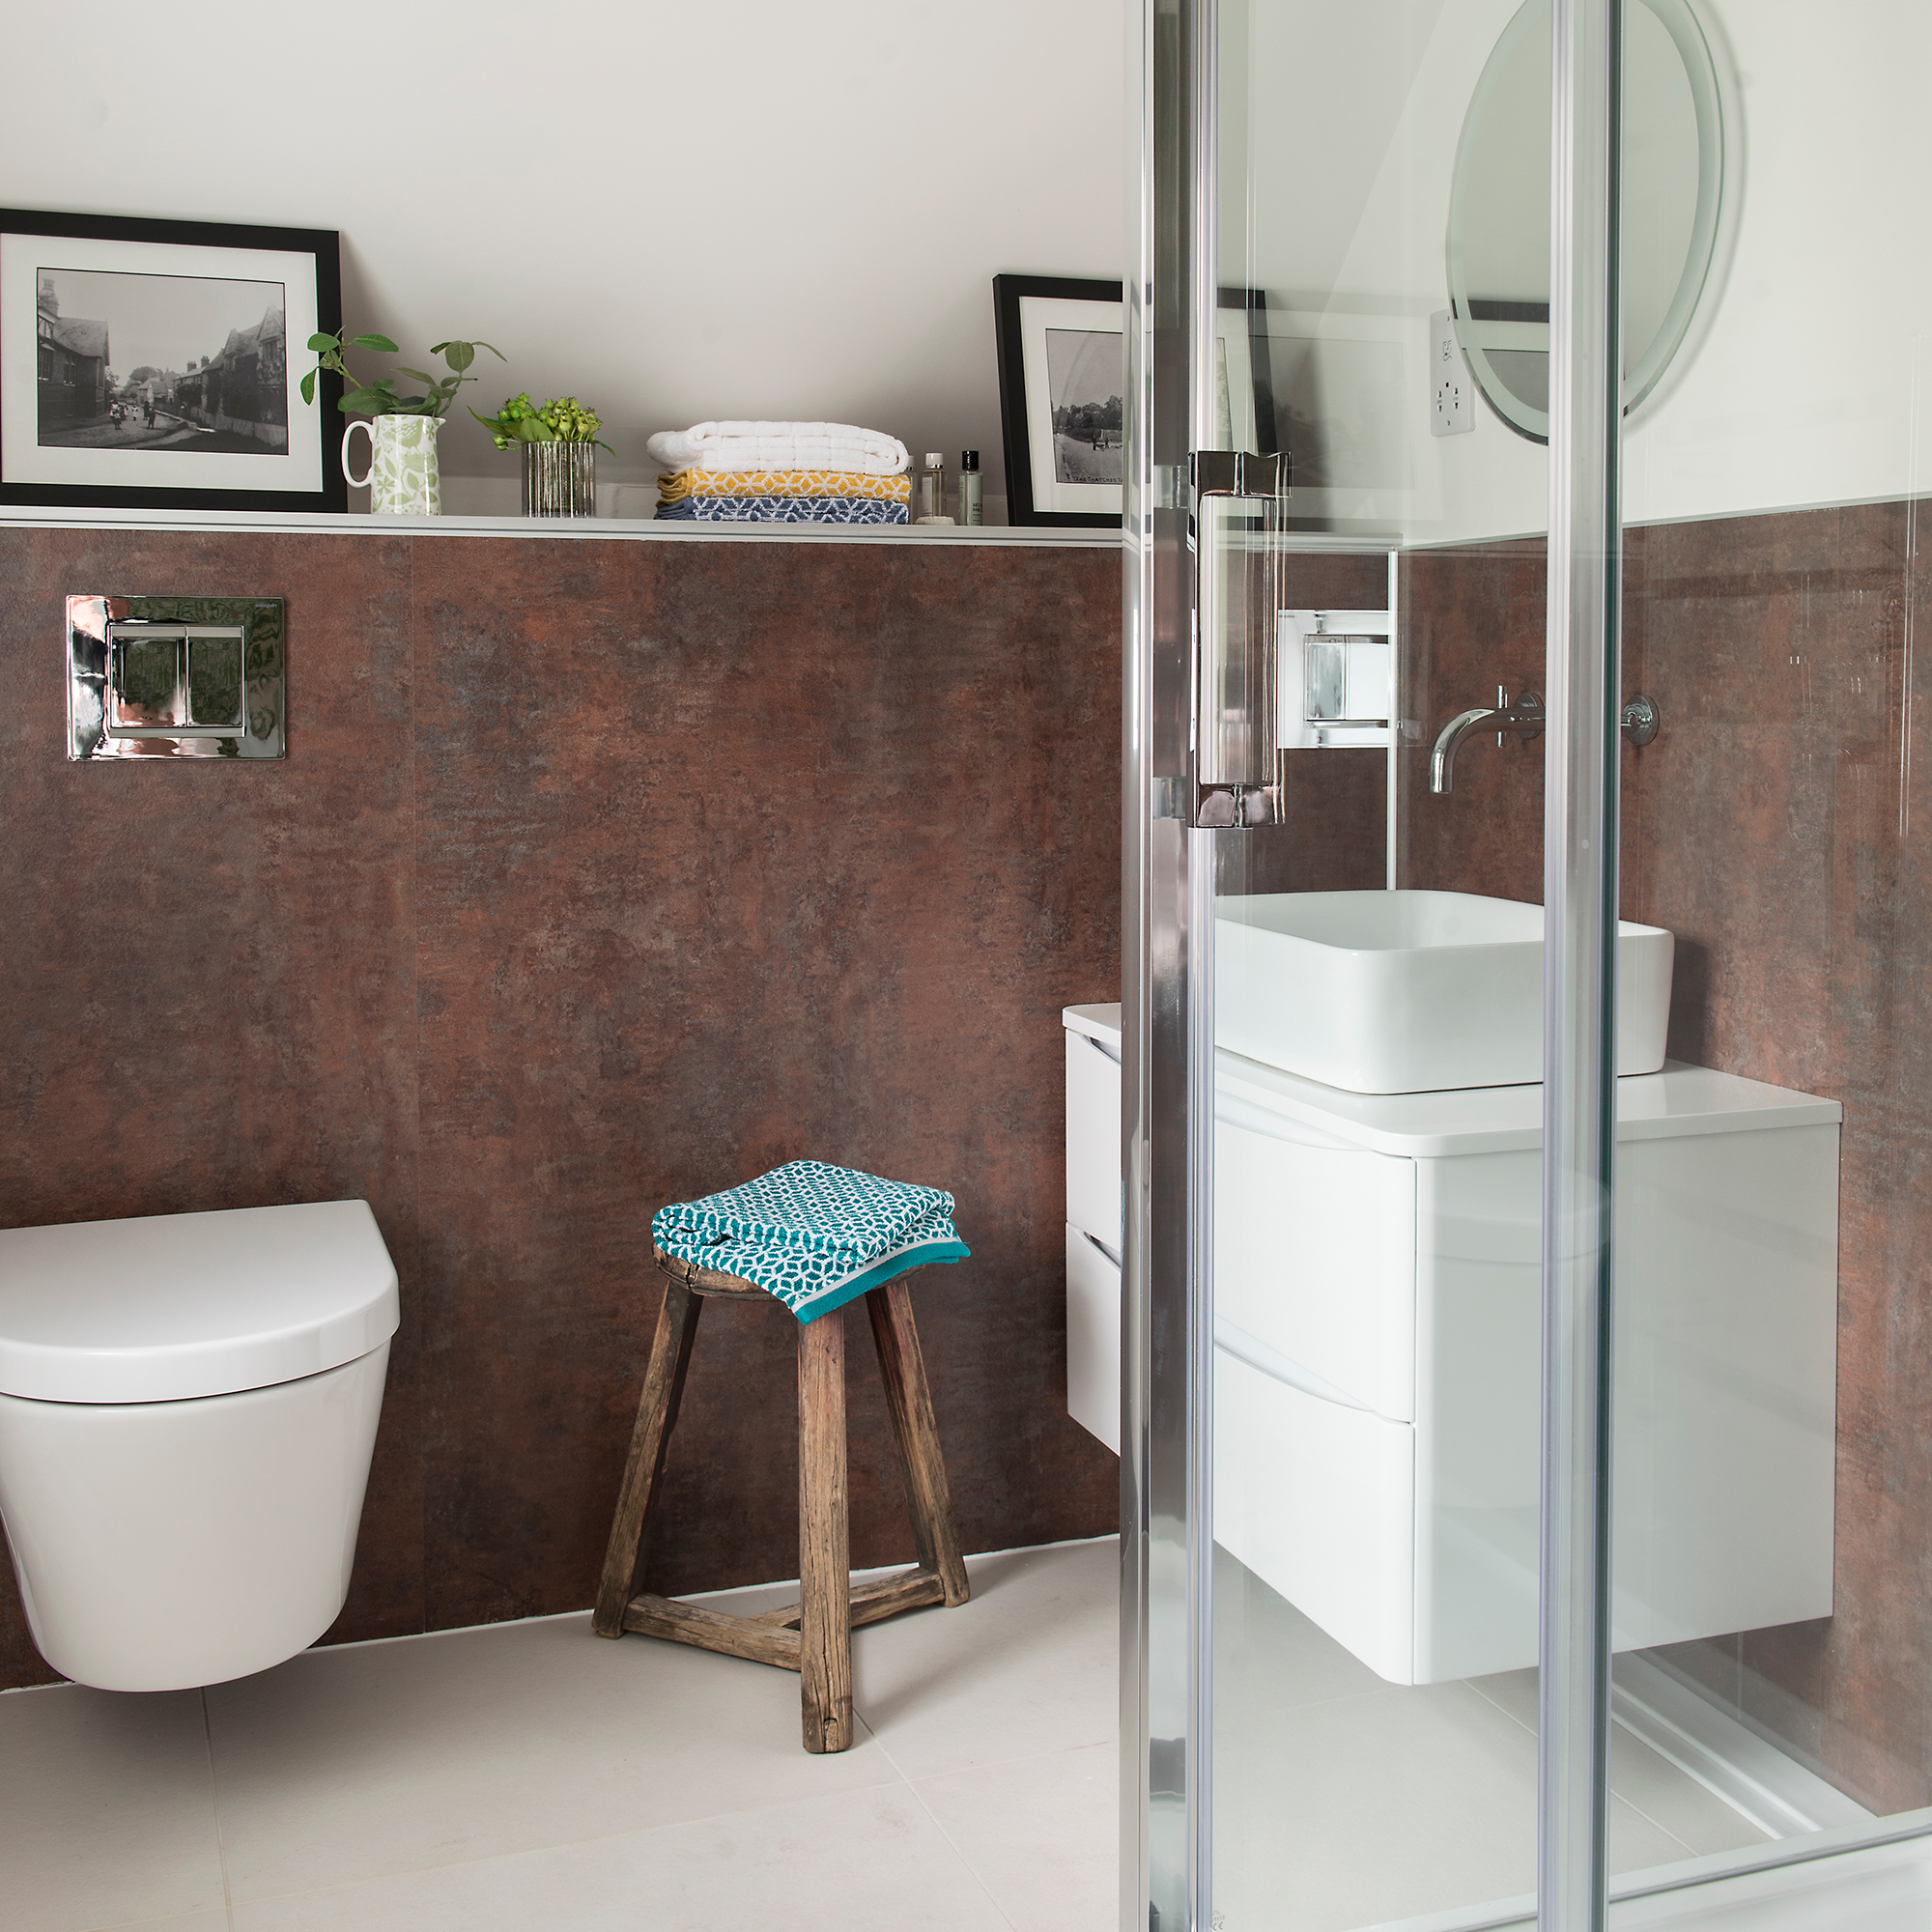 ensuite bathroom with shower and  bronze effect tiles